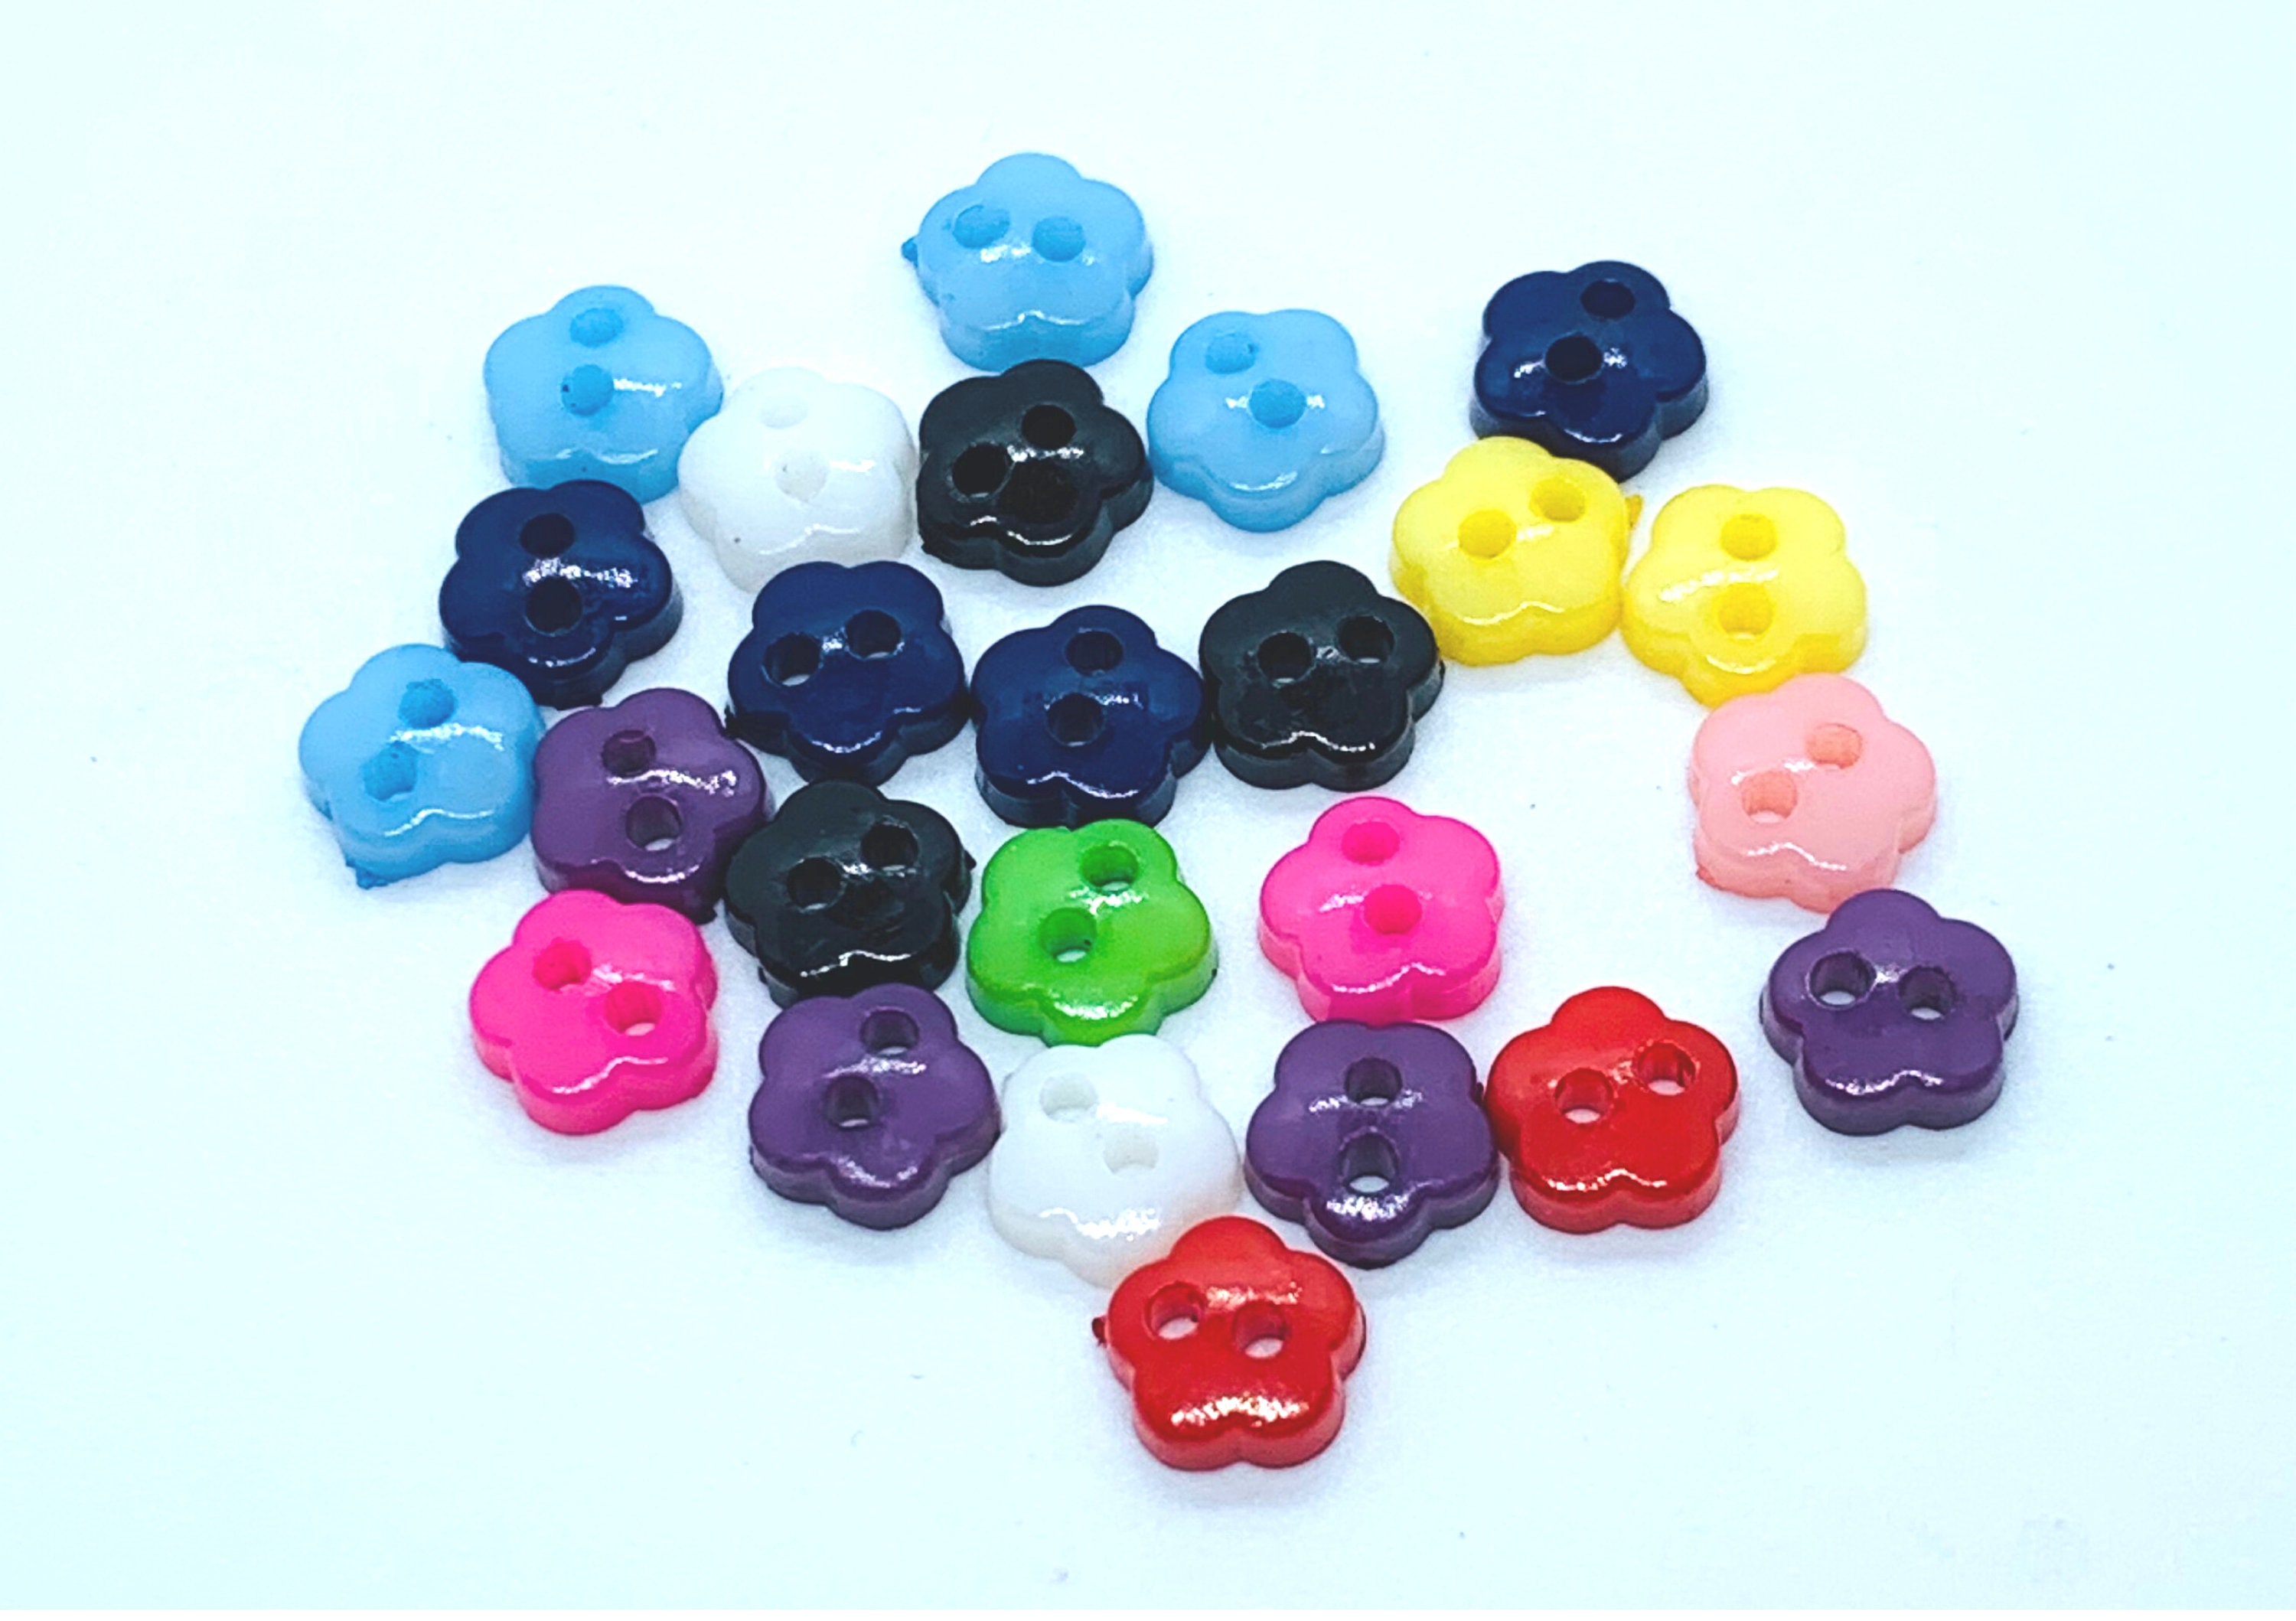 SHONDE Resin Flower Buttons 40 Pieces ​2 Hole Flower Buttons Pearlescent Sewing Button Baby Resin Button for Sewing Crafting Replacement Needlework